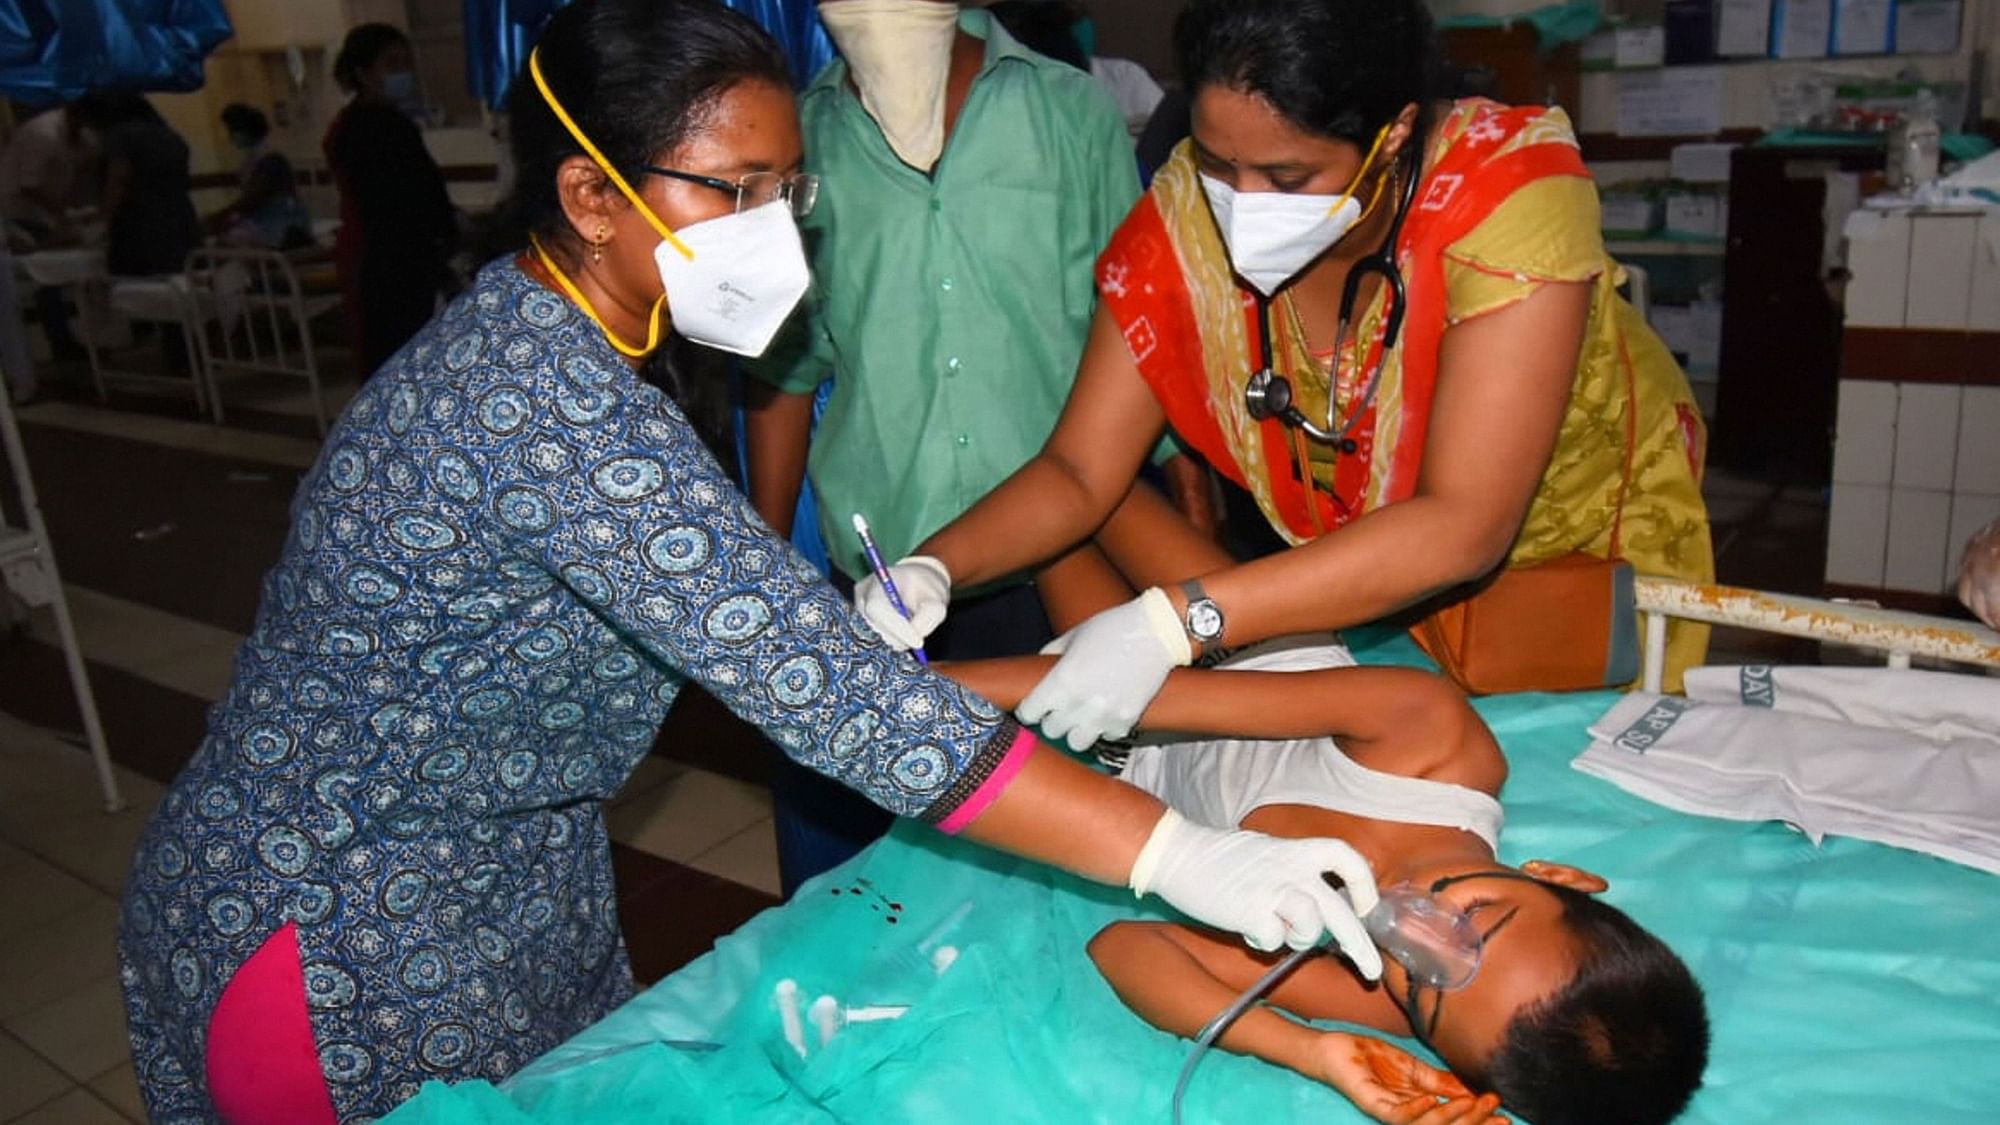 An affected child being treated at King George Hospital after a major chemical gas leakage at LG Polymers industry in RR Venkatapuram village, Visakhapatnam, Thursday, 7 May.